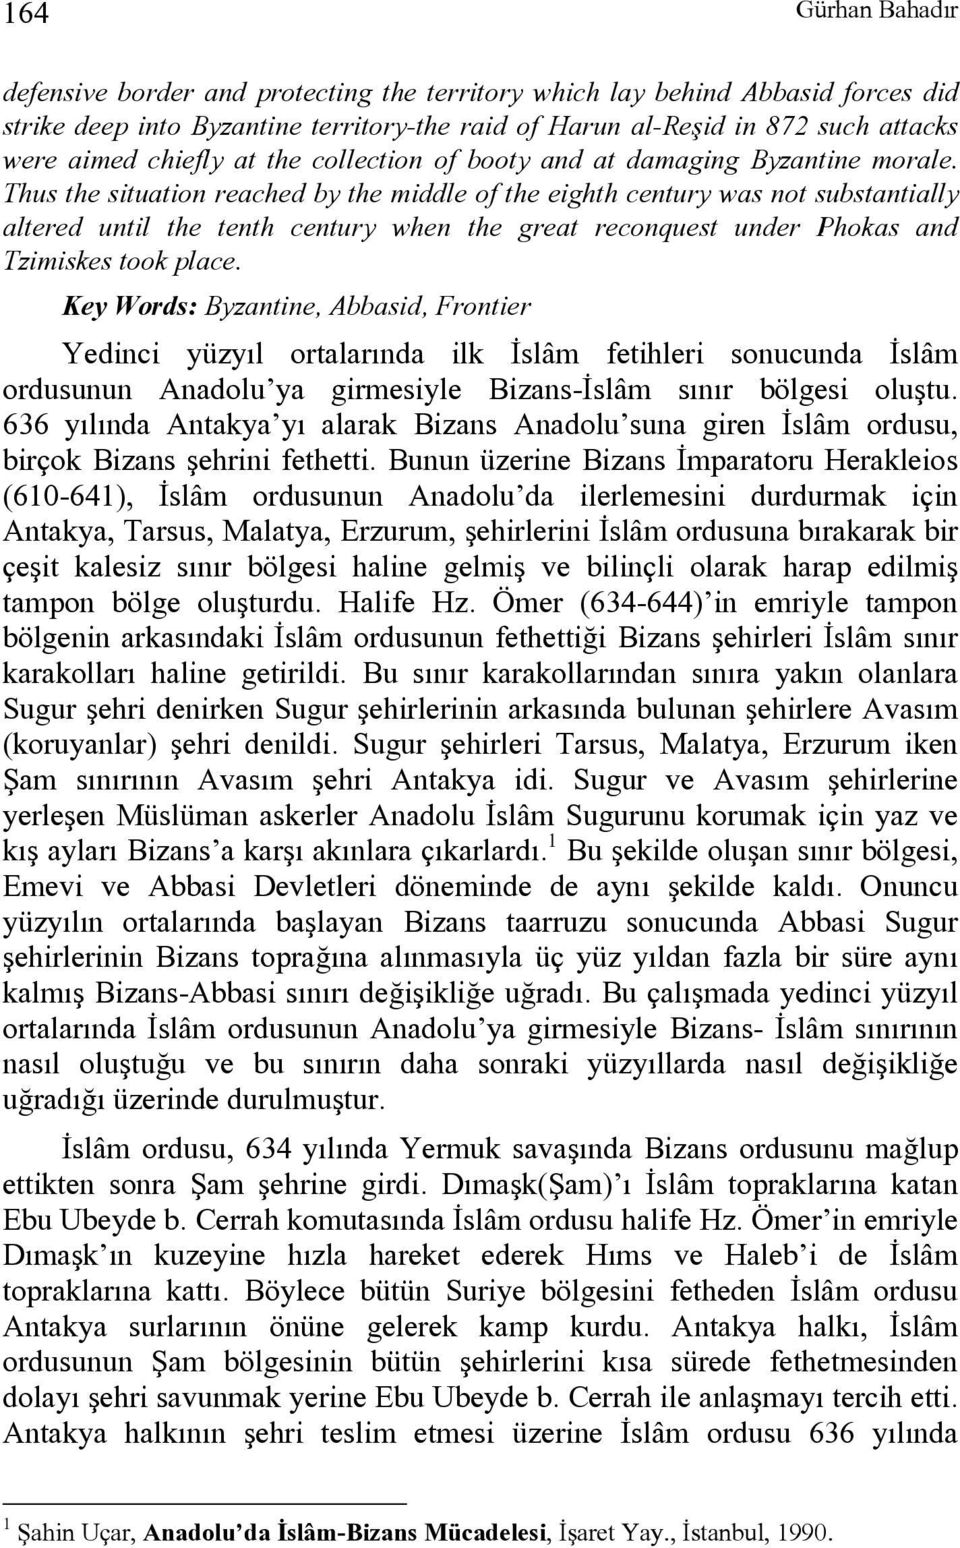 Thus the situation reached by the middle of the eighth century was not substantially altered until the tenth century when the great reconquest under Phokas and Tzimiskes took place.